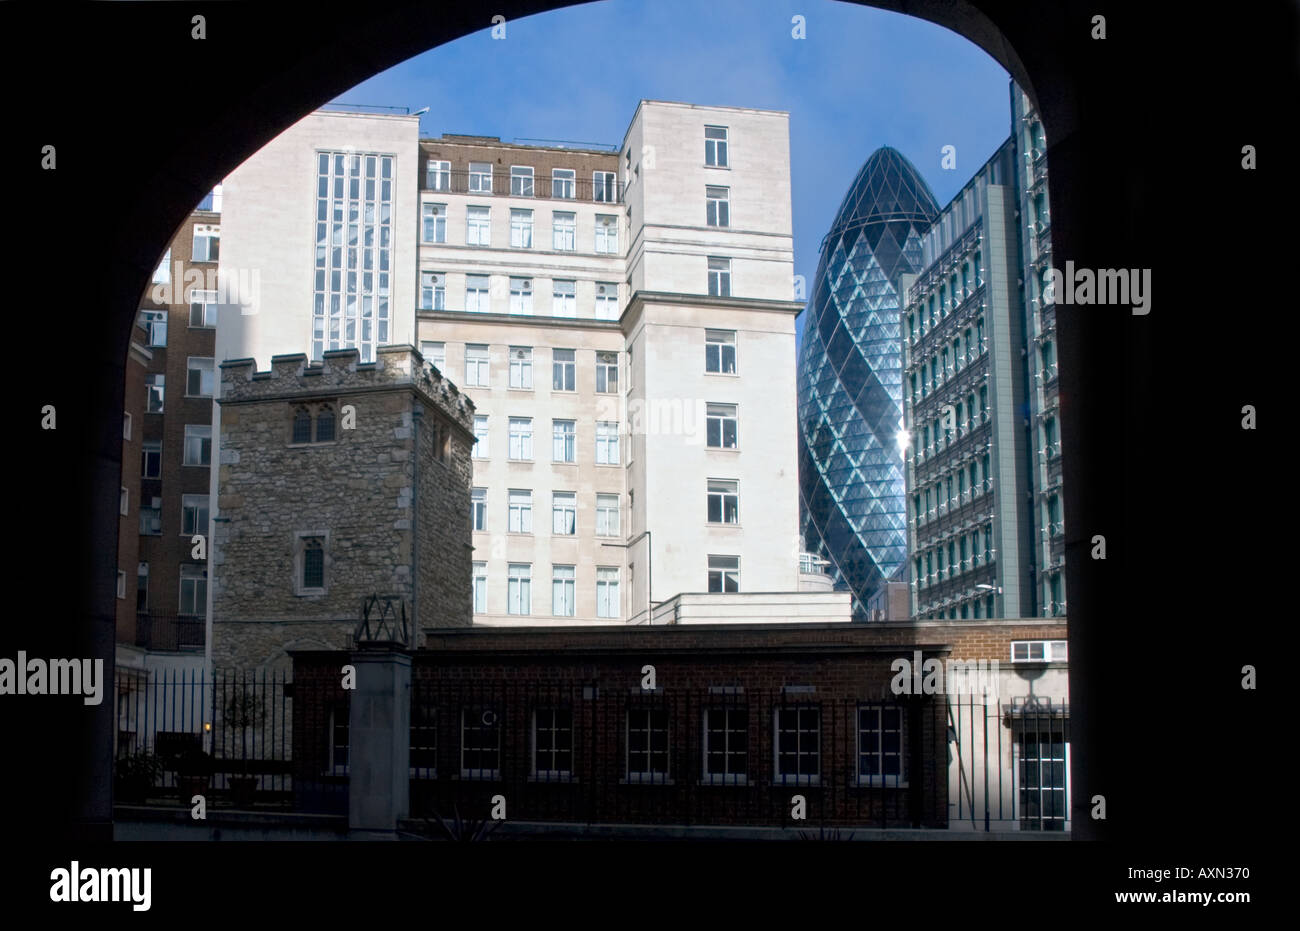 Swiss Re building or the glass gherkin In front of church of St Helen s Bishopgate Stock Photo